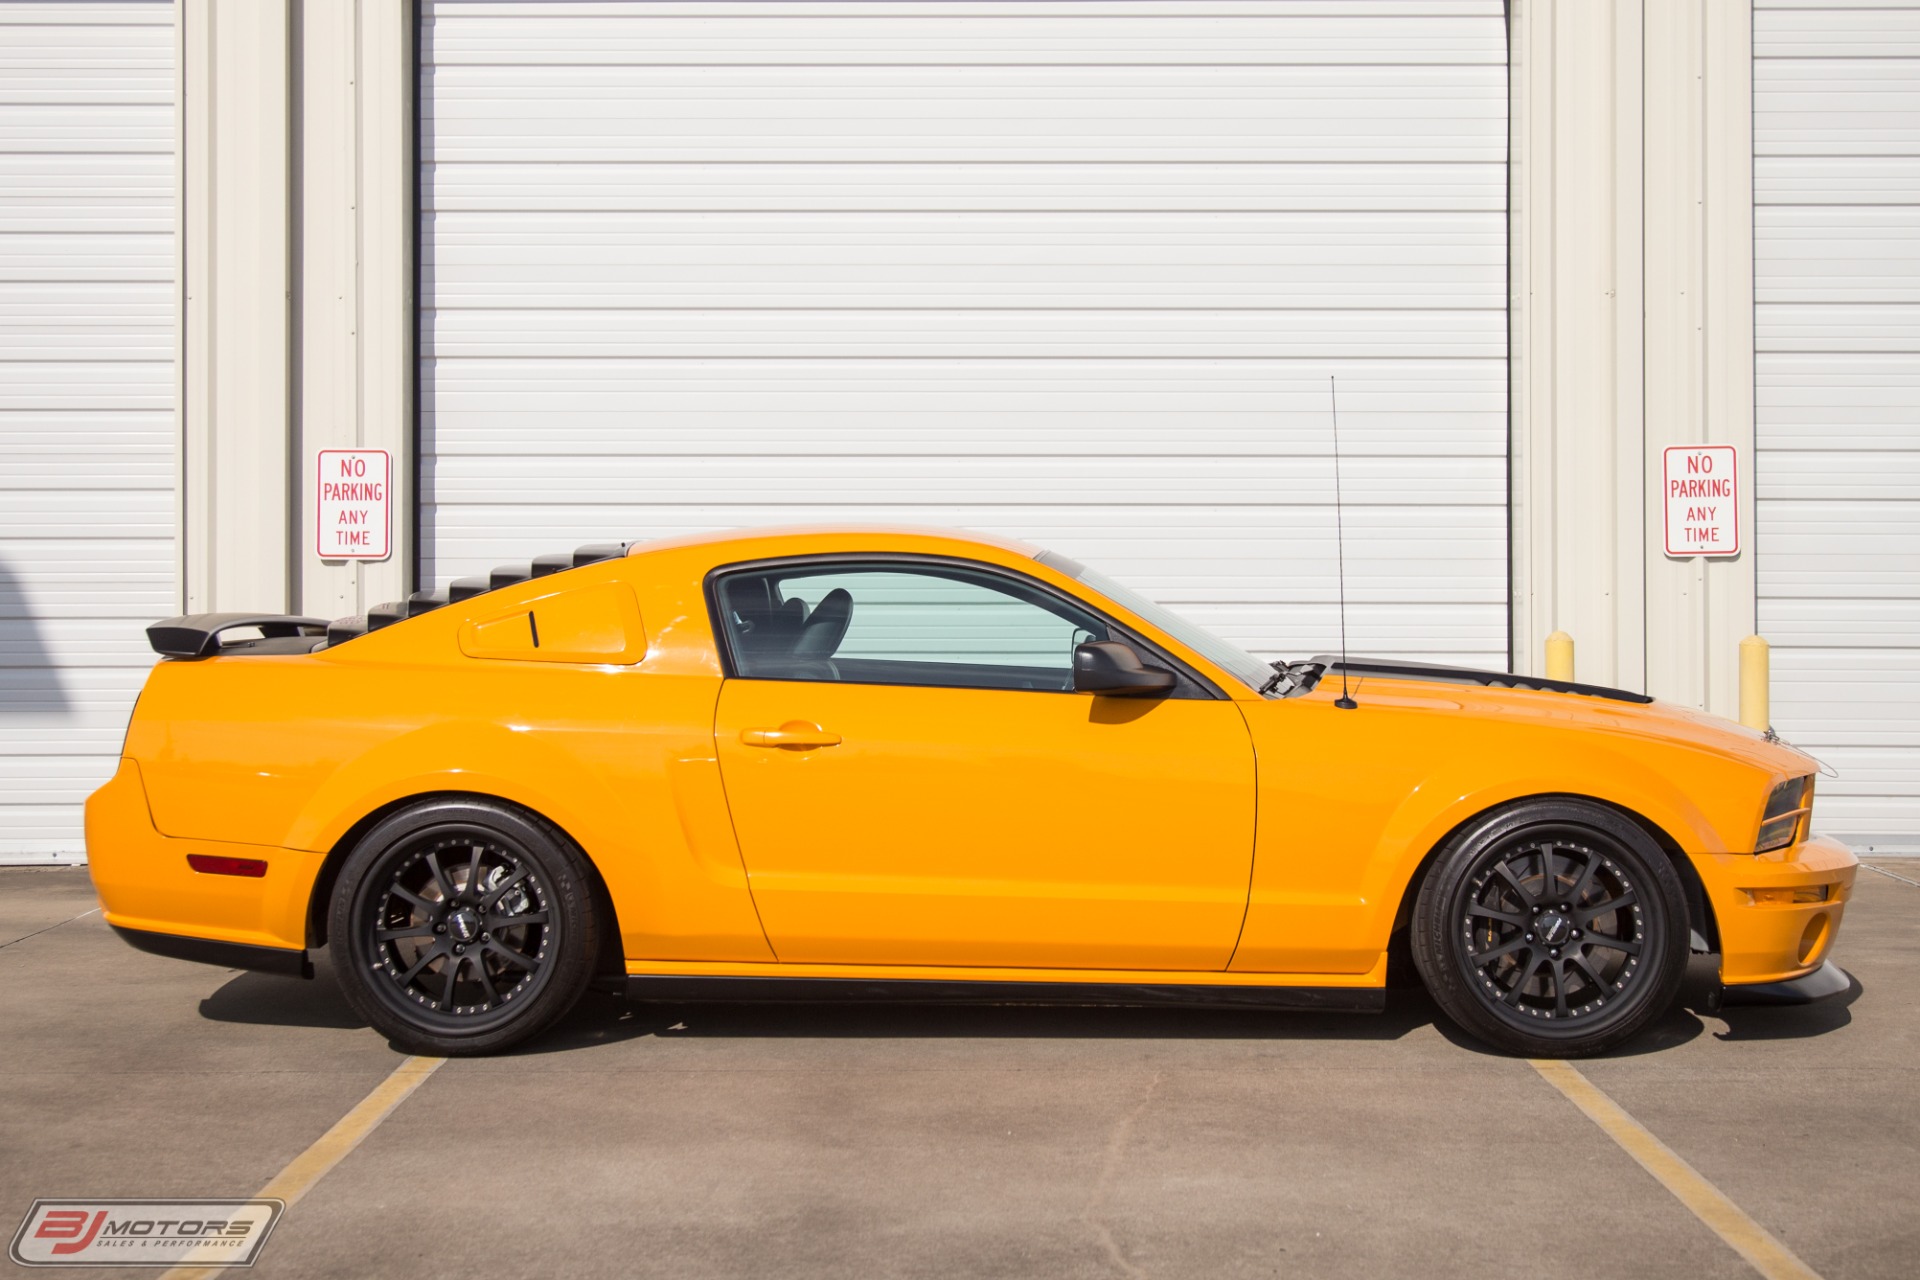 Used-2007-Ford-Mustang-Parnelli-Jones-with-Aluminator-XS-Crate-Engine-Track-Setup